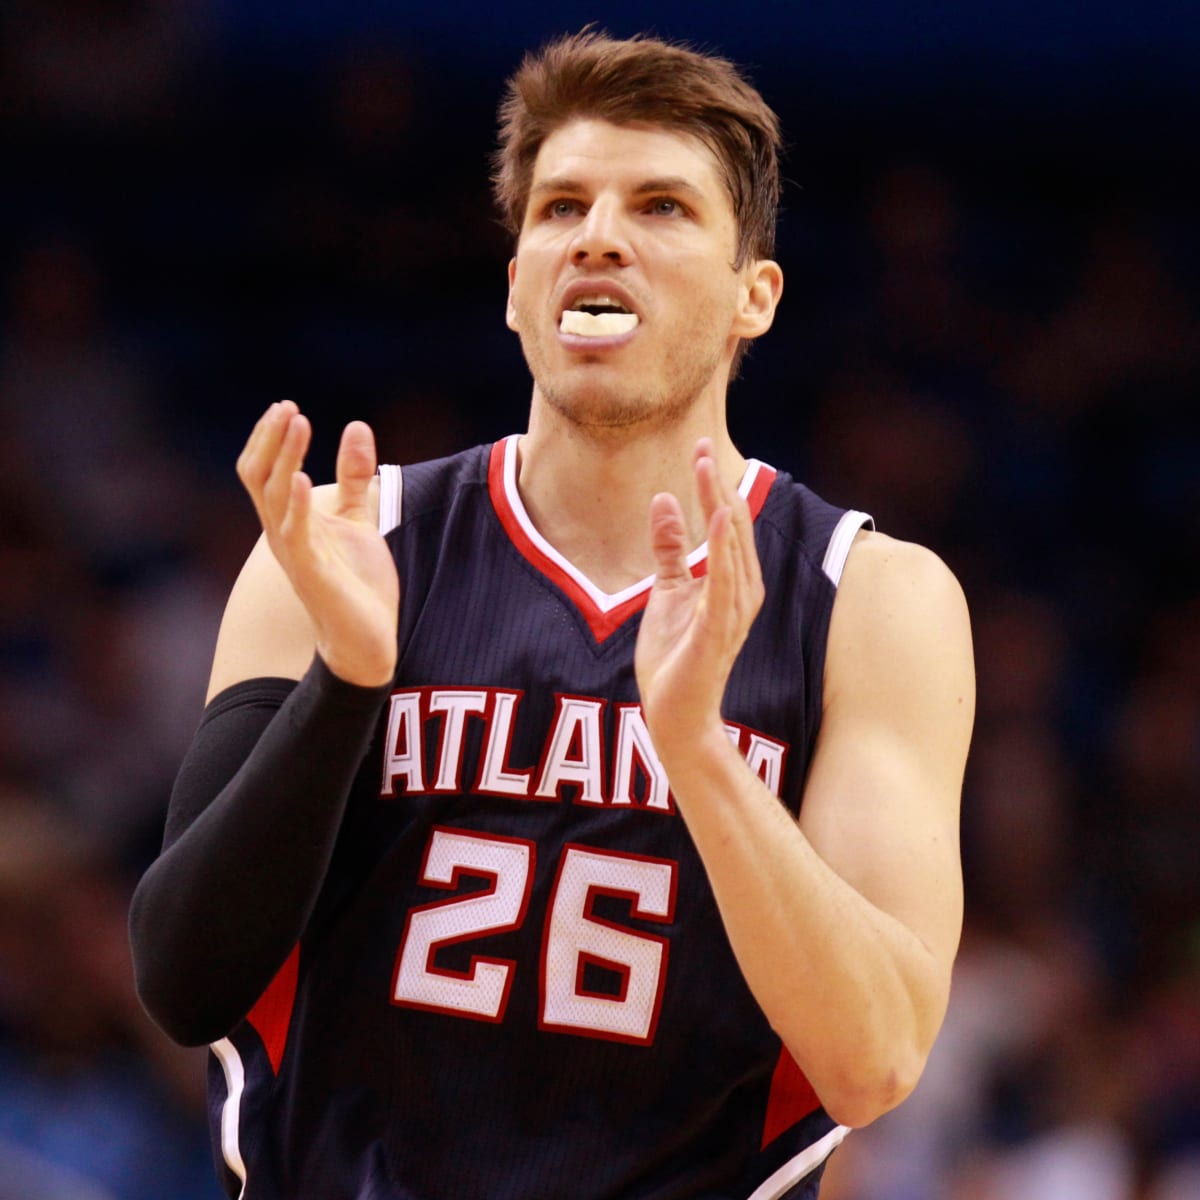 Report: Free agent Kyle Korver is 'in the bag' for the Brooklyn